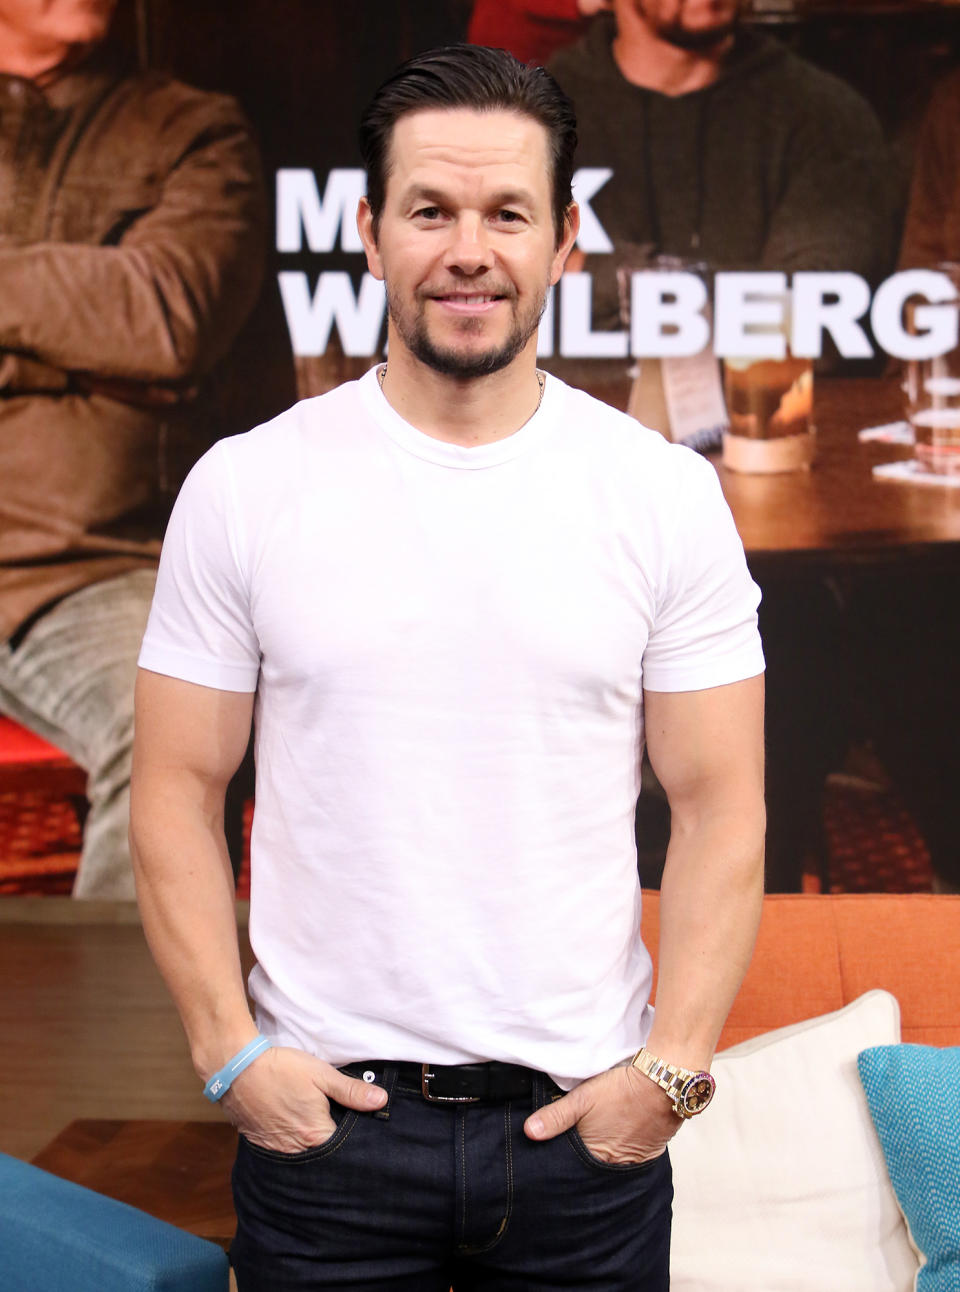 Mark Wahlberg Says He's' 'Dying' to Work with Mel Gibson Again: 'It Would Be a Dream'